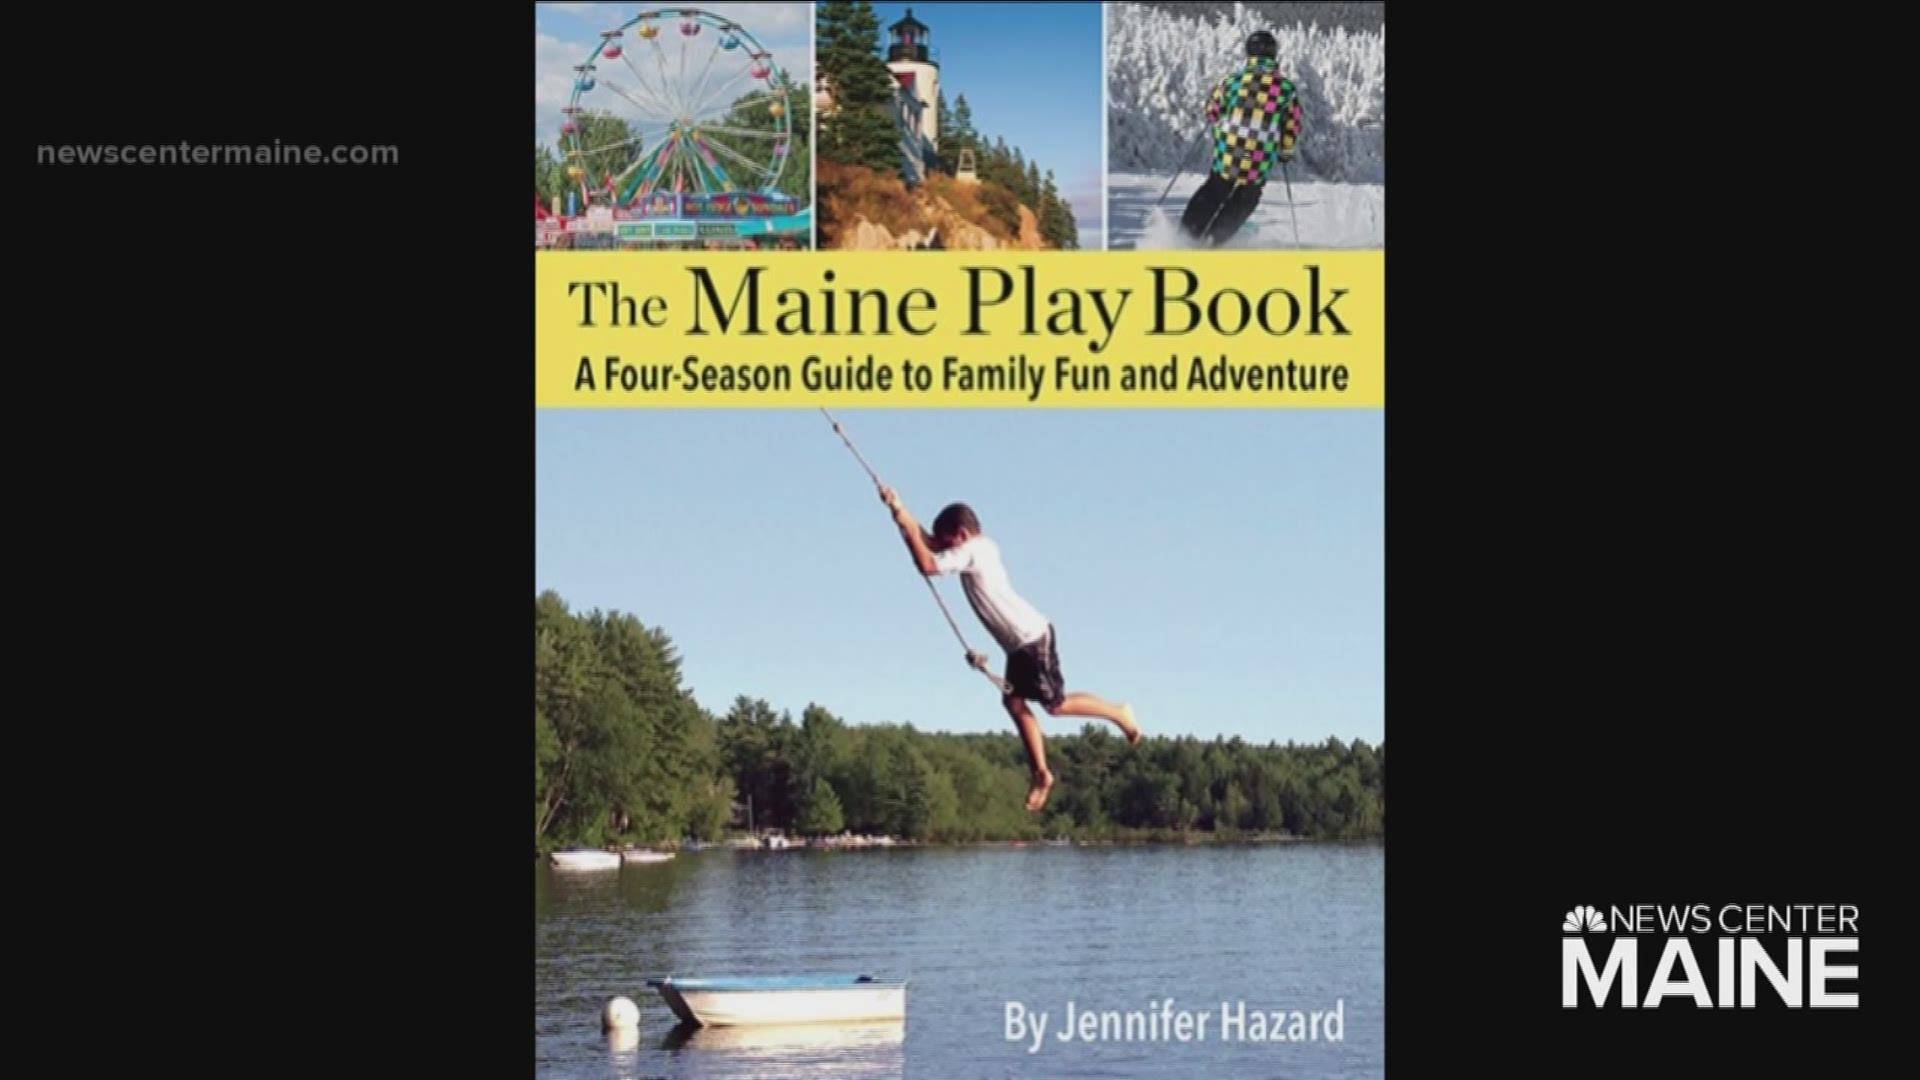 Jennifer Hazzard wrote a book about all things Maine & most of them you can do with your kids.